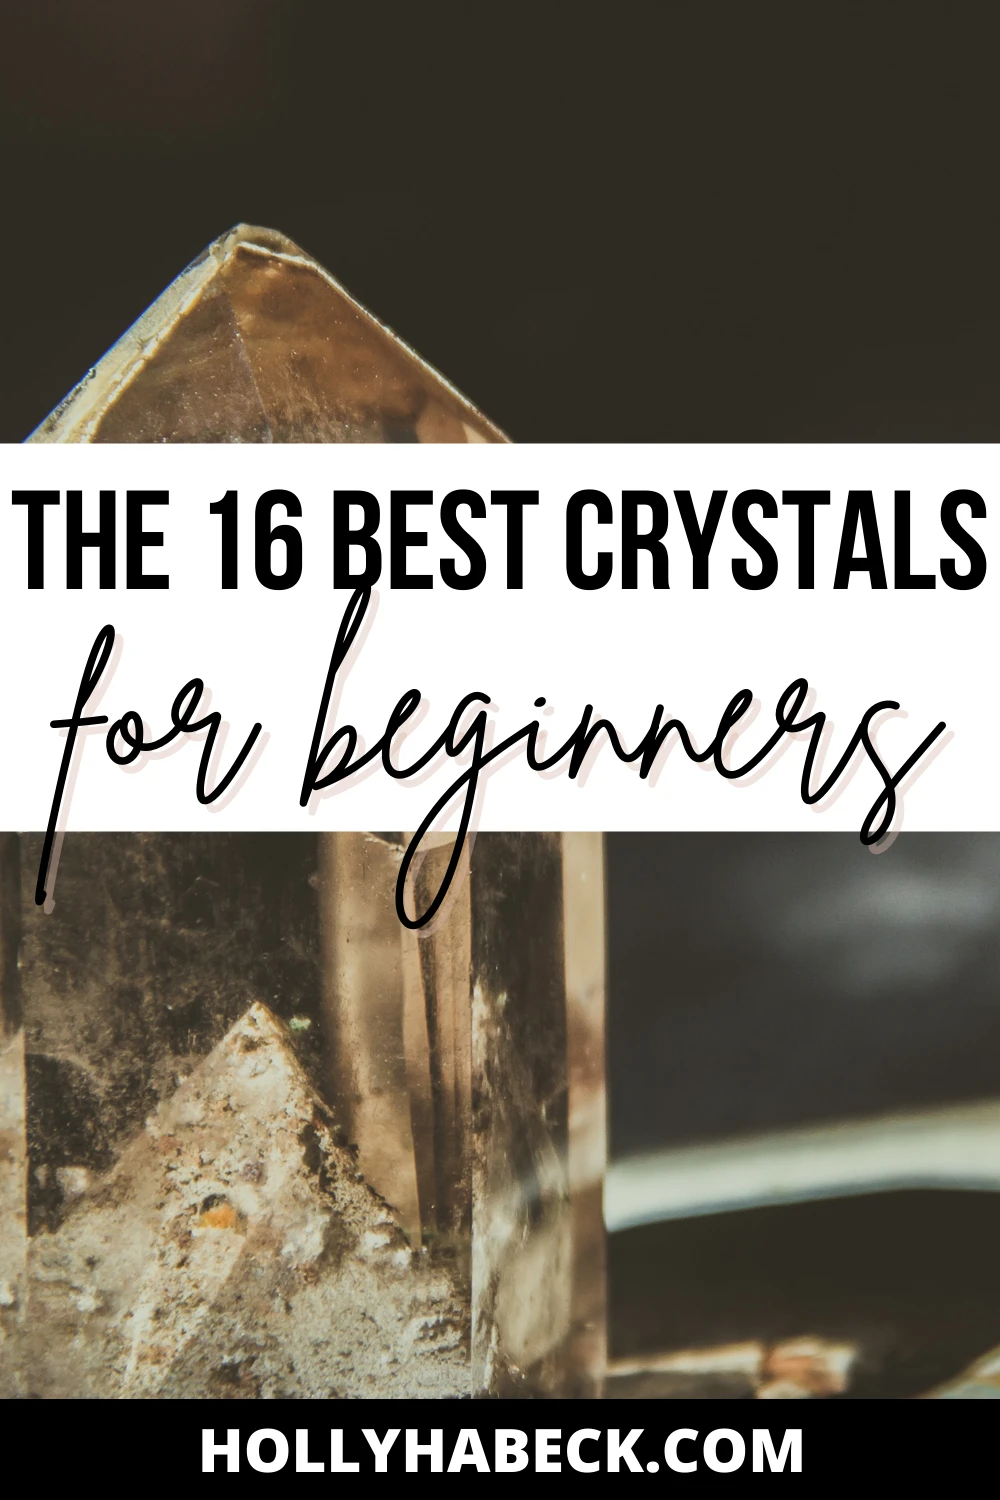 The 16 Best Crystals for Beginners